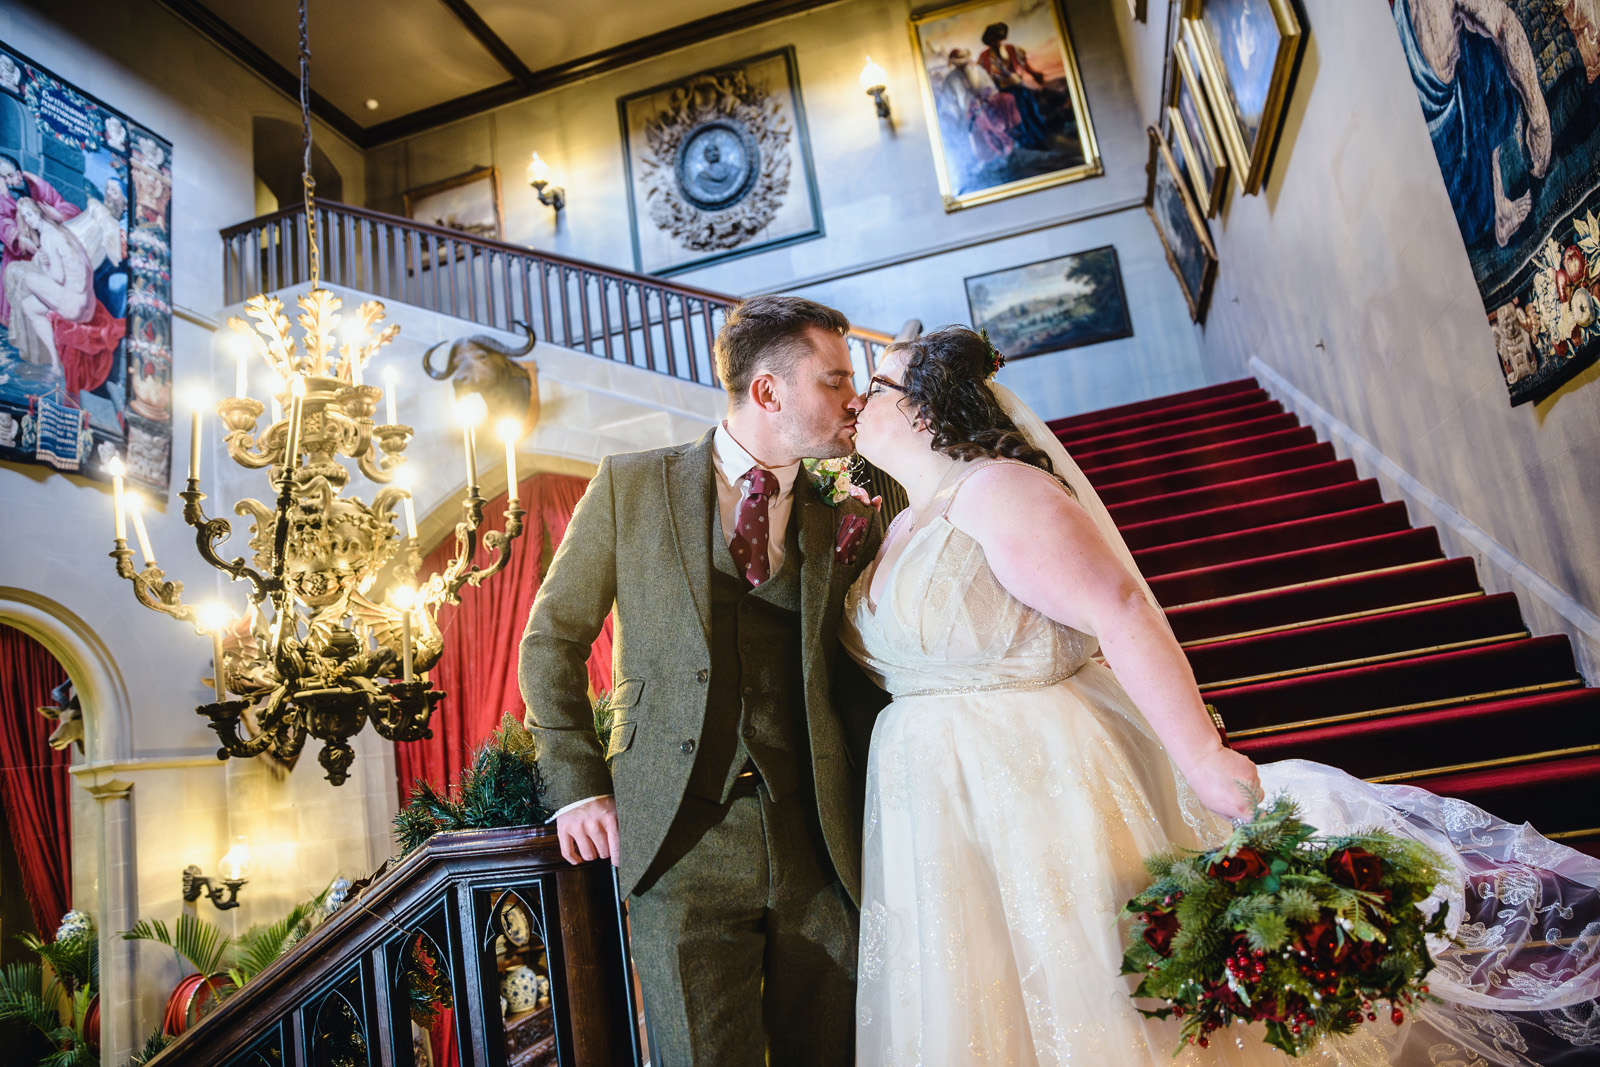 Winter Wedding Photography at Wedding Photography at Eastnor Castle